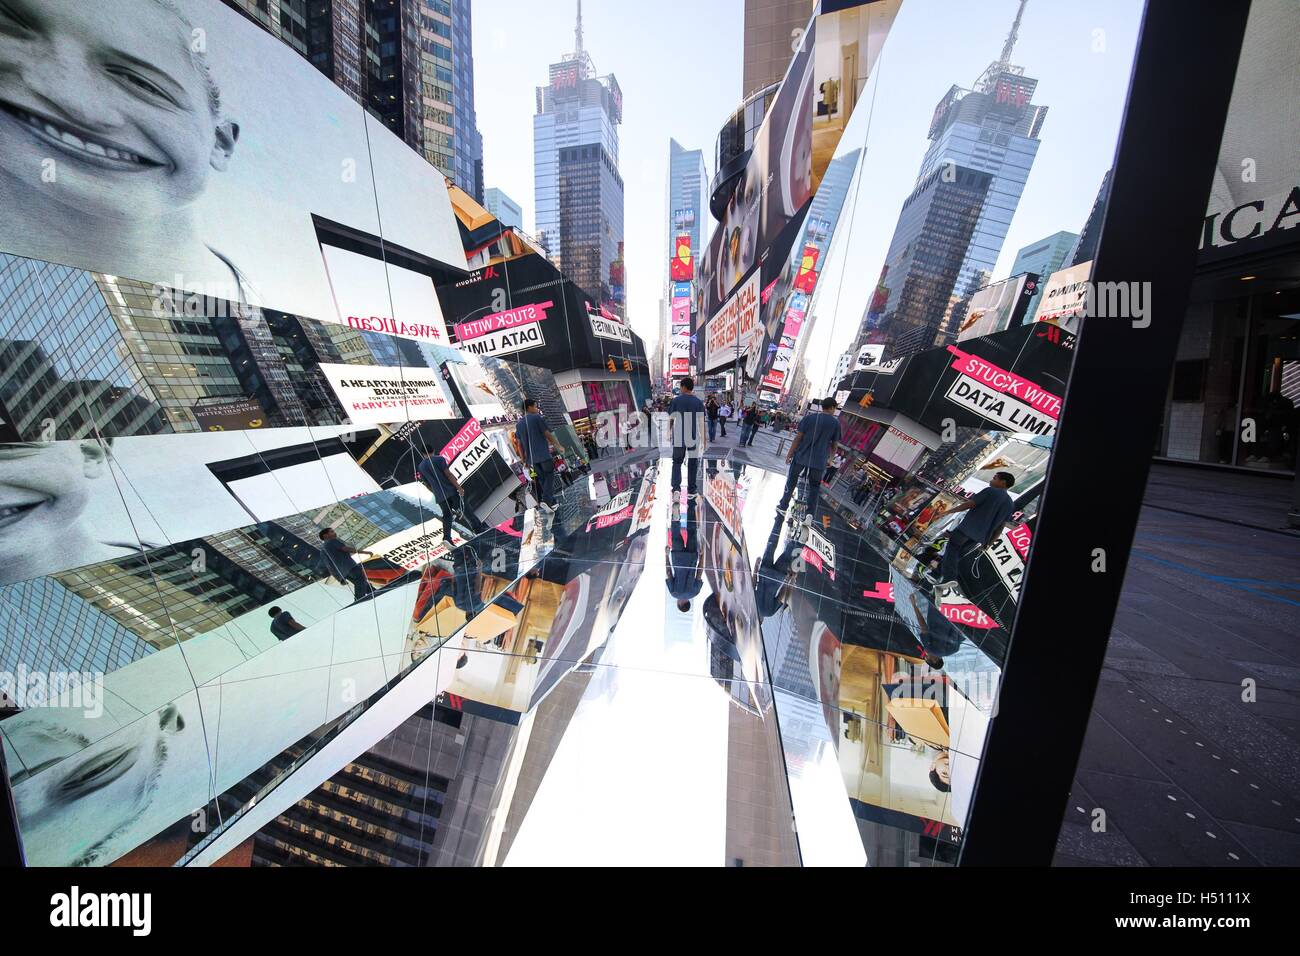 The Beginning Of The End Times Square High Resolution Stock Photography and  Images - Alamy